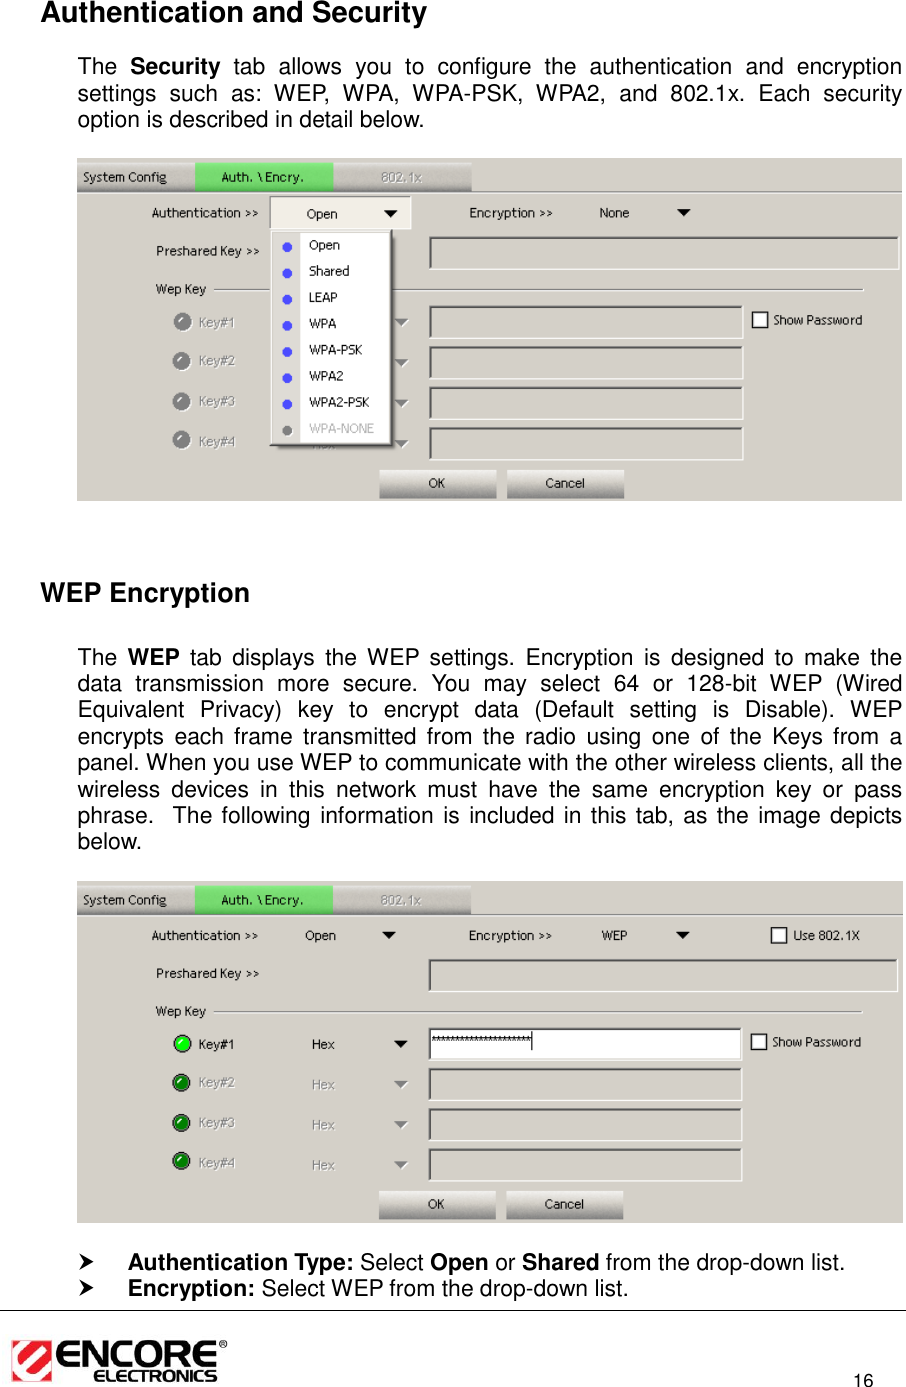                                                                                                                          16    Authentication and Security The  Security  tab  allows  you  to  configure  the  authentication  and  encryption settings  such  as:  WEP,  WPA,  WPA-PSK,  WPA2,  and  802.1x.  Each  security option is described in detail below.        WEP Encryption  The  WEP  tab  displays  the WEP  settings.  Encryption  is  designed  to  make  the data  transmission  more  secure.  You  may  select  64  or  128-bit  WEP  (Wired Equivalent  Privacy)  key  to  encrypt  data  (Default  setting  is  Disable).  WEP encrypts  each frame  transmitted from  the  radio  using  one  of  the  Keys from  a panel. When you use WEP to communicate with the other wireless clients, all the wireless  devices  in  this  network  must  have  the  same  encryption  key  or  pass phrase.  The following information is included in this tab, as the image depicts below.     Authentication Type: Select Open or Shared from the drop-down list.   Encryption: Select WEP from the drop-down list.  